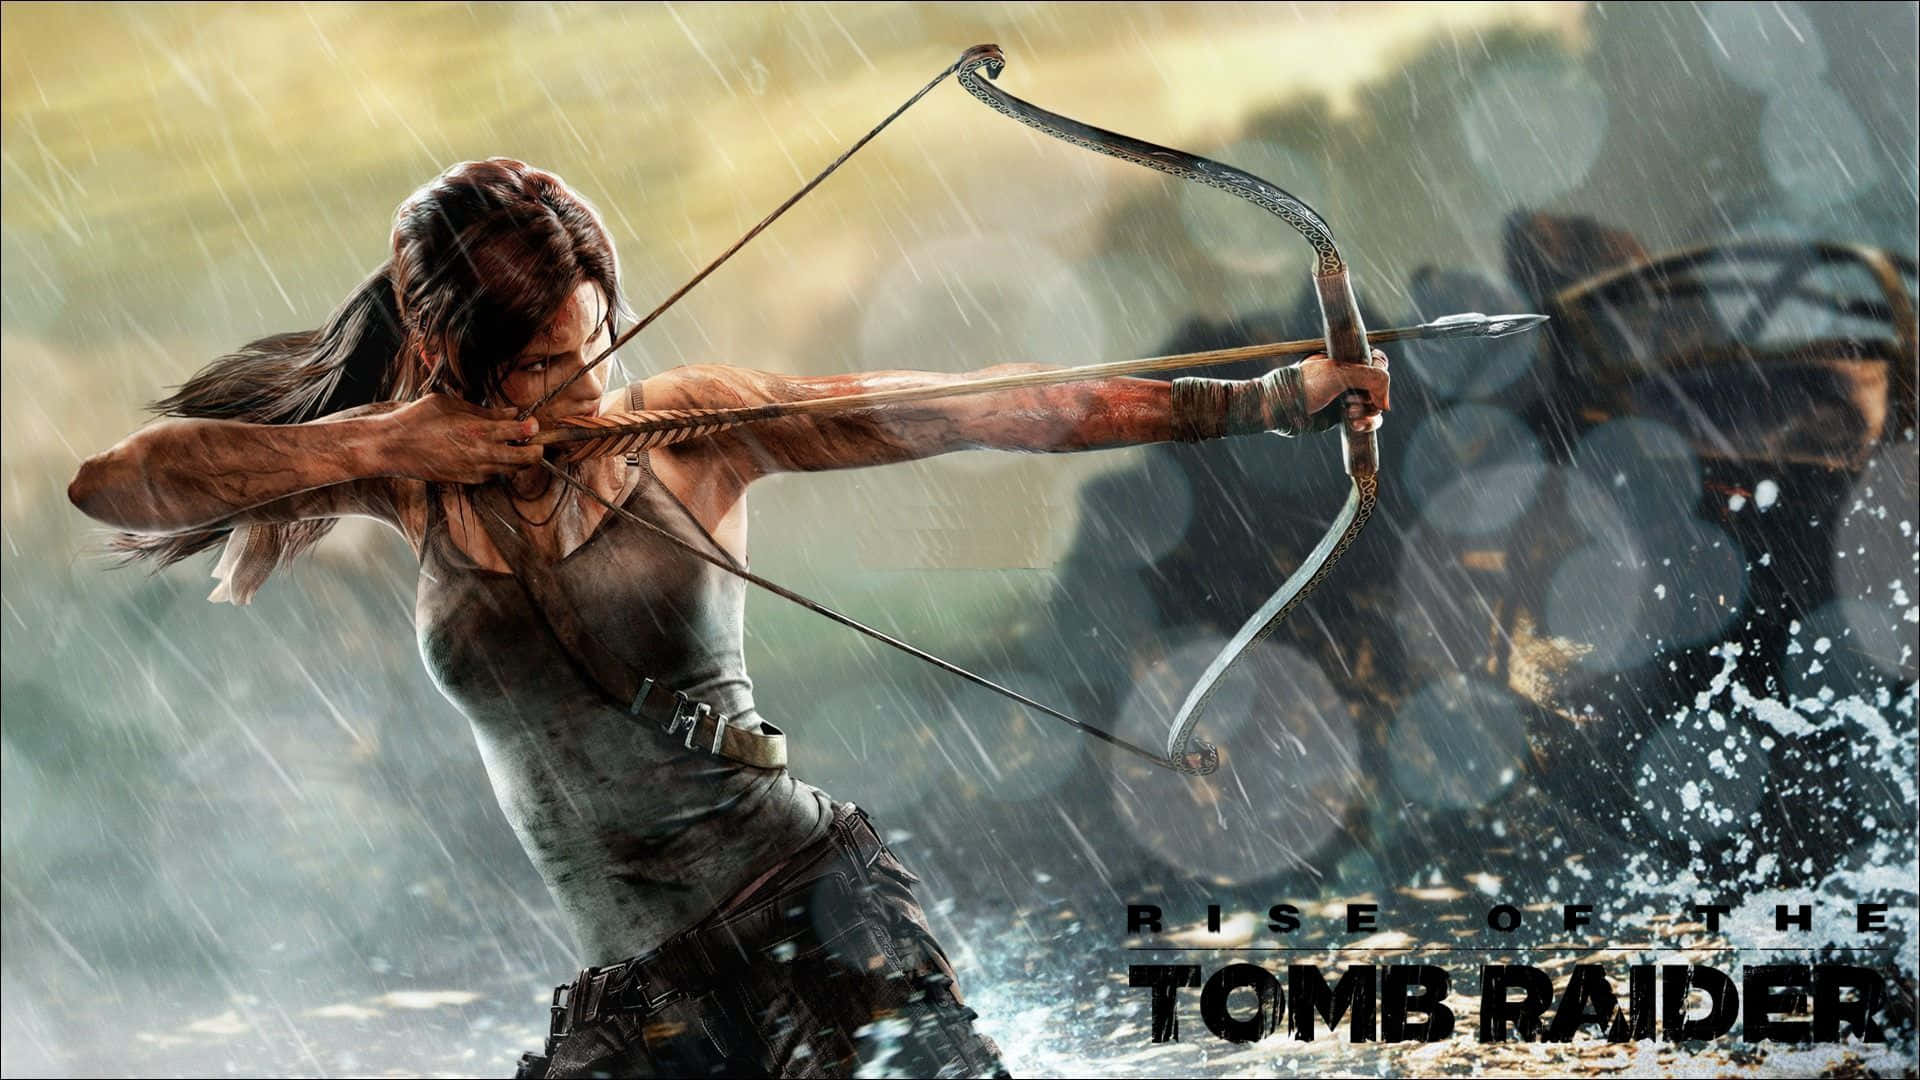 Intriguing Lara Croft in Action, 1080p Rise of the Tomb Raider Background